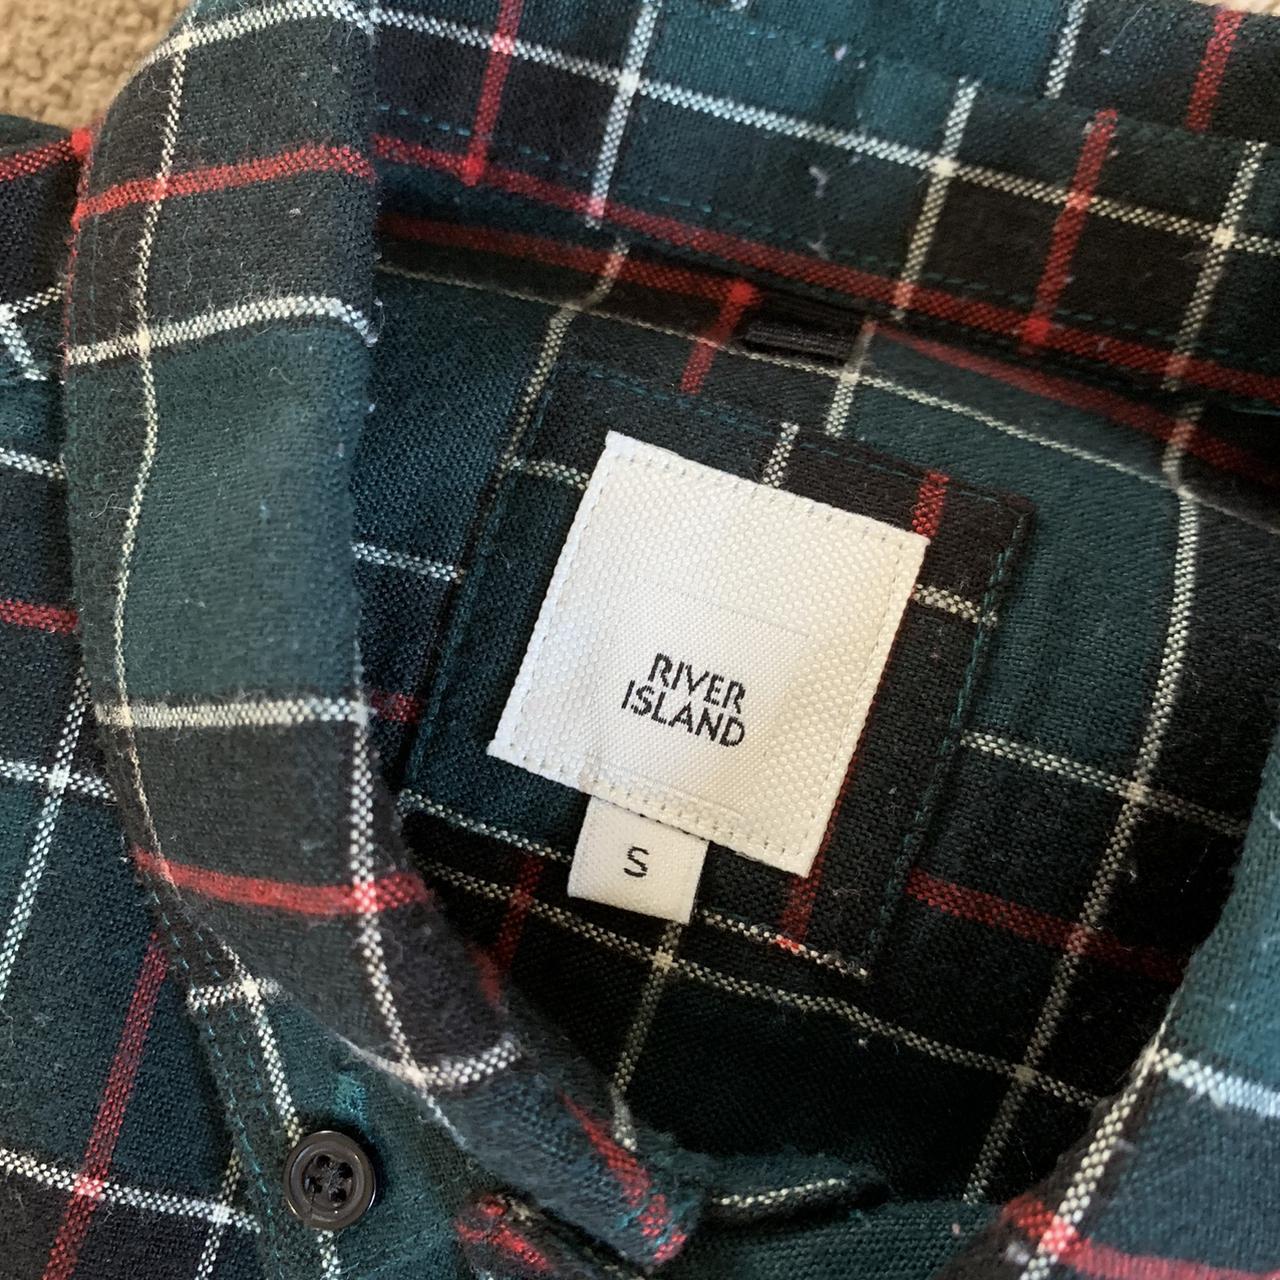 River Island green and red checked long sleeved... - Depop